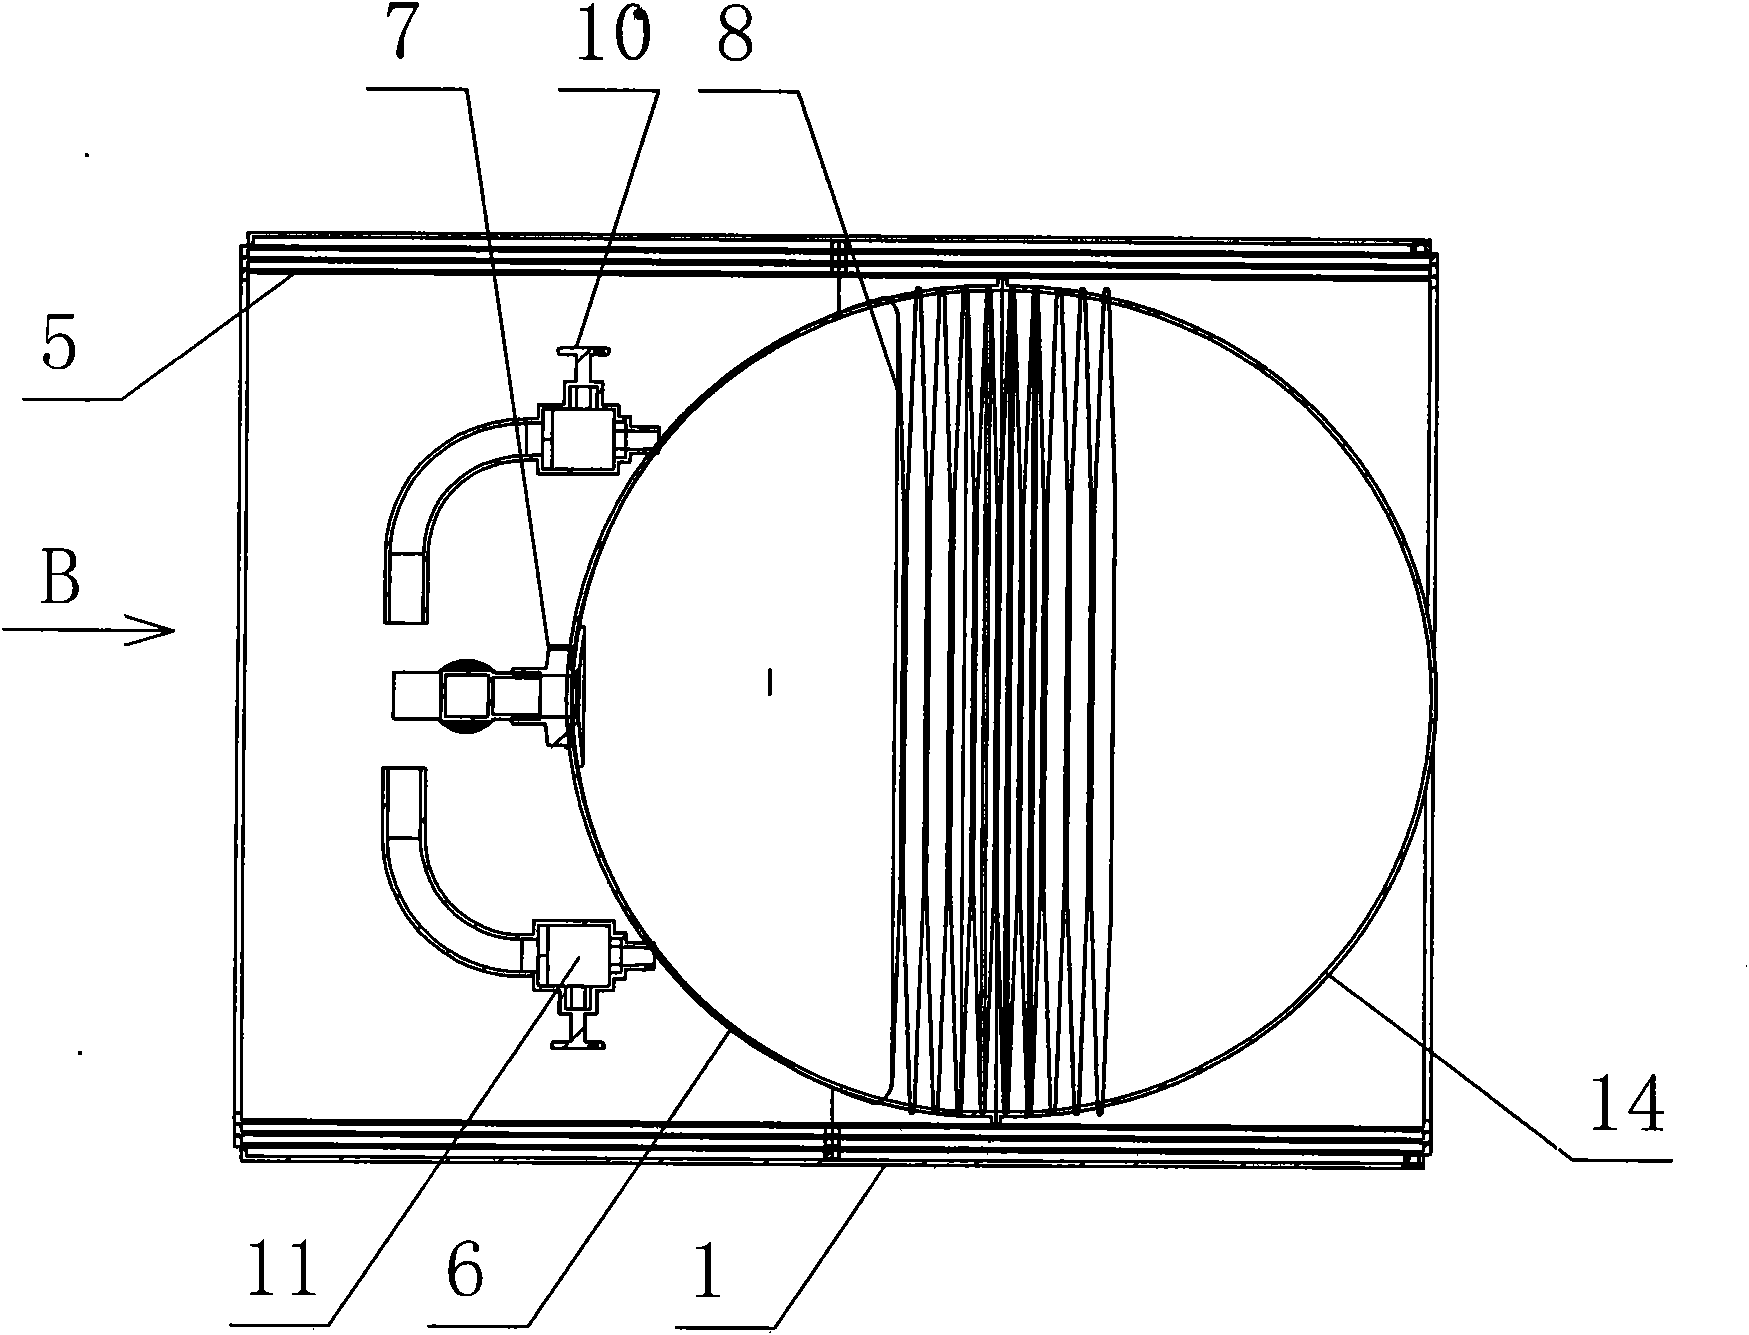 Telescopic multifunctional rescue device capable of collecting and supplying air power